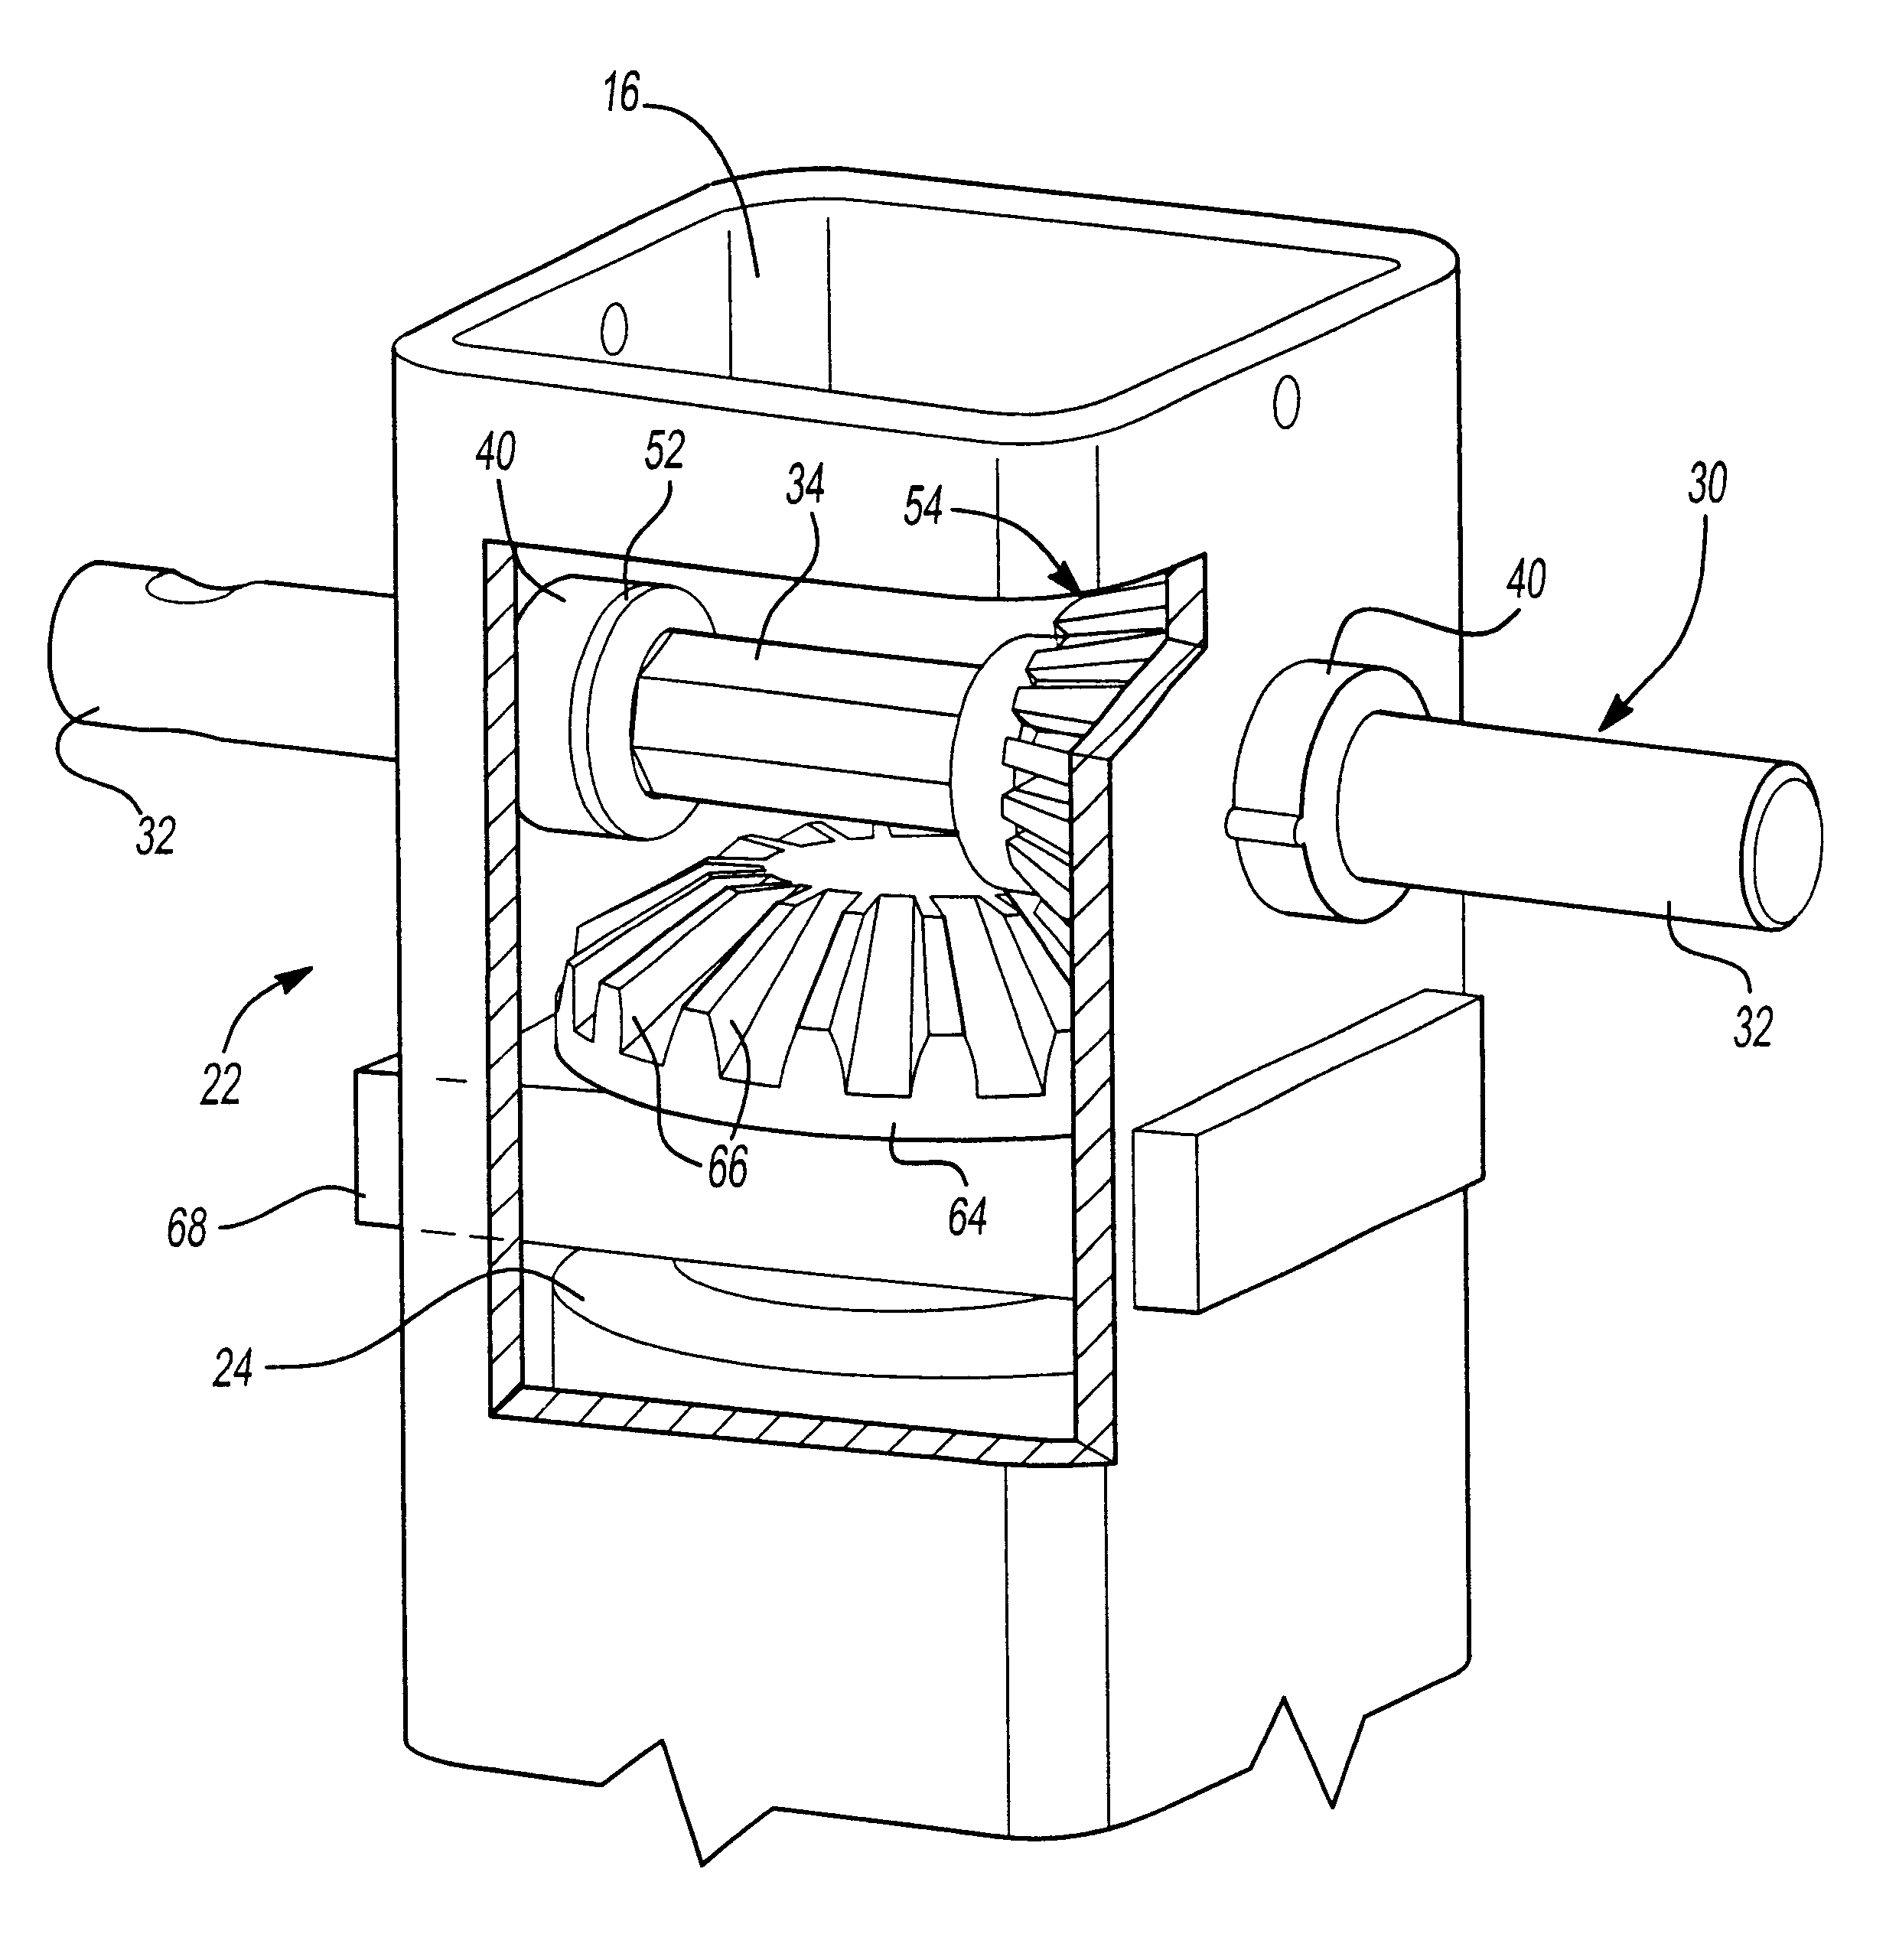 Removable gear drive for mechanical jack